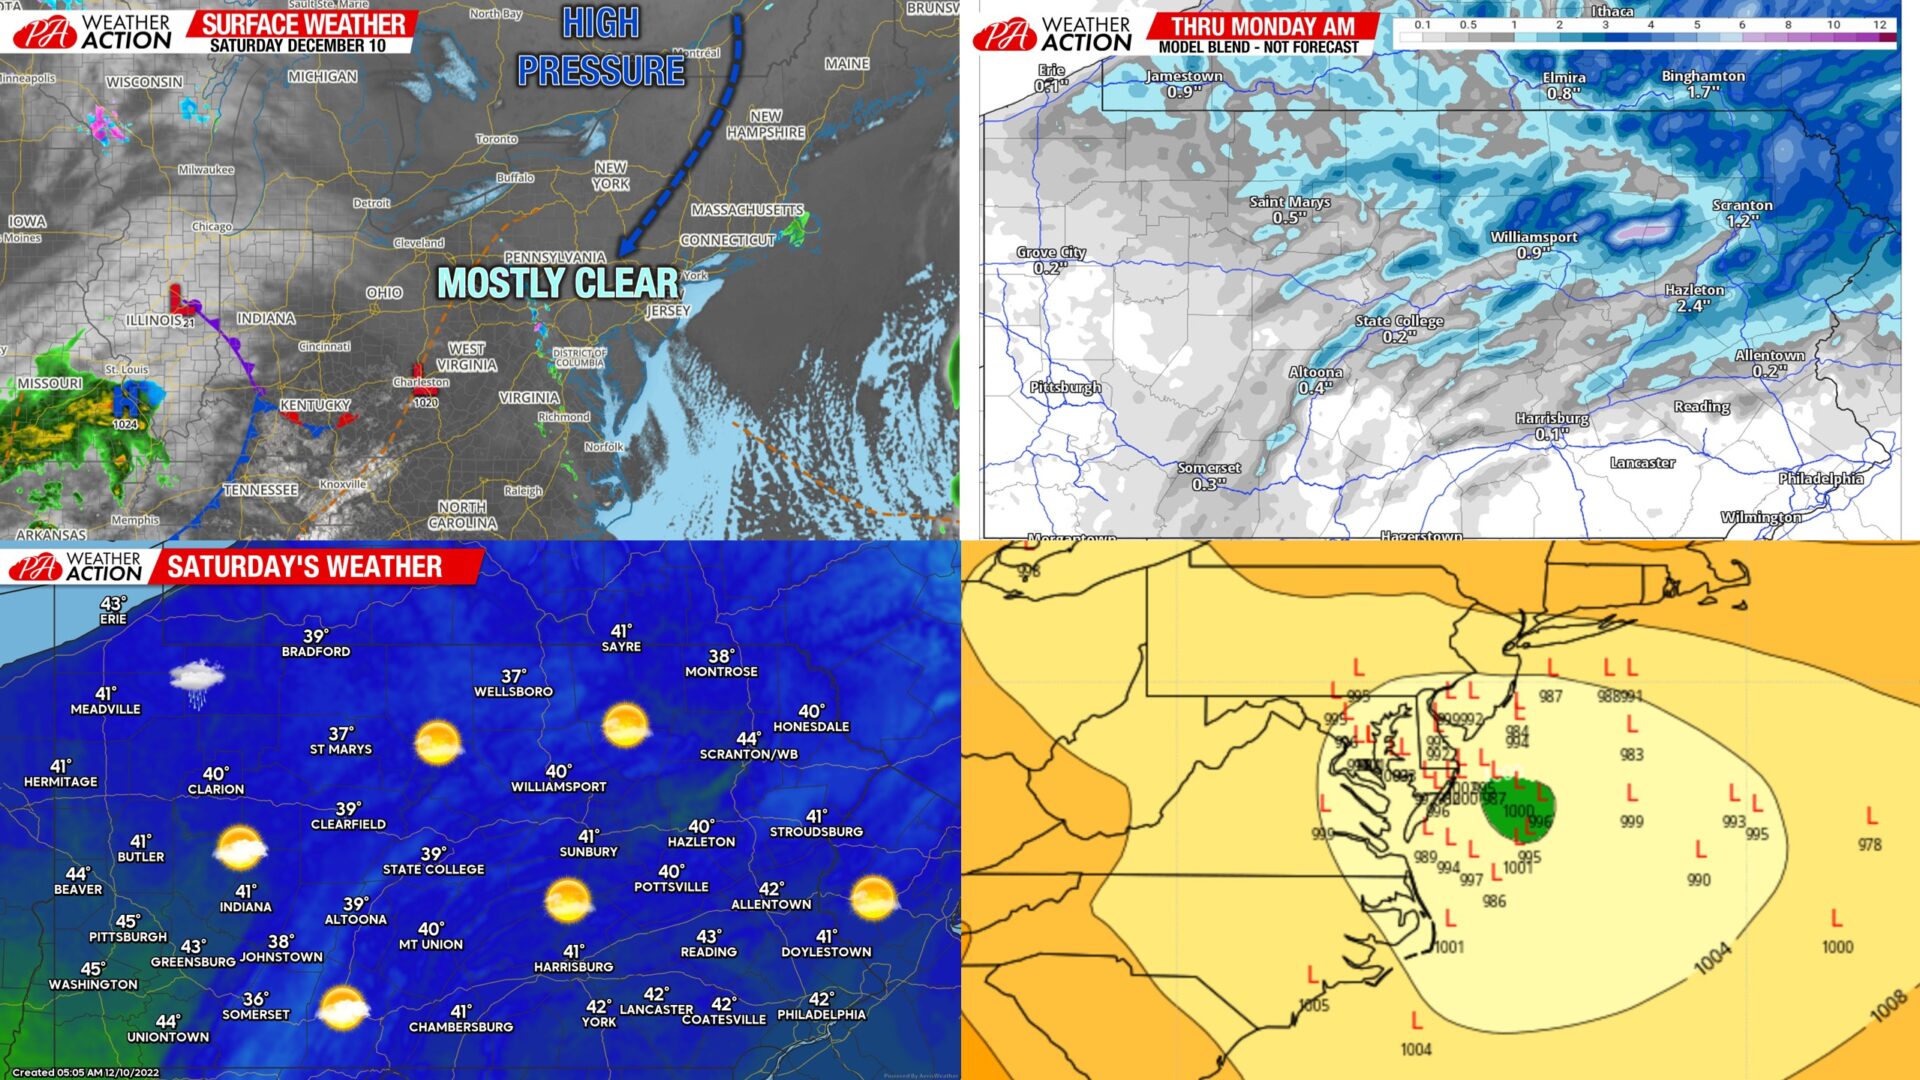 Saturday Dec 10 Report: Increasing Clouds Ahead of Sunday's Light Impact Event; Larger Potential Looming Thursday - Friday